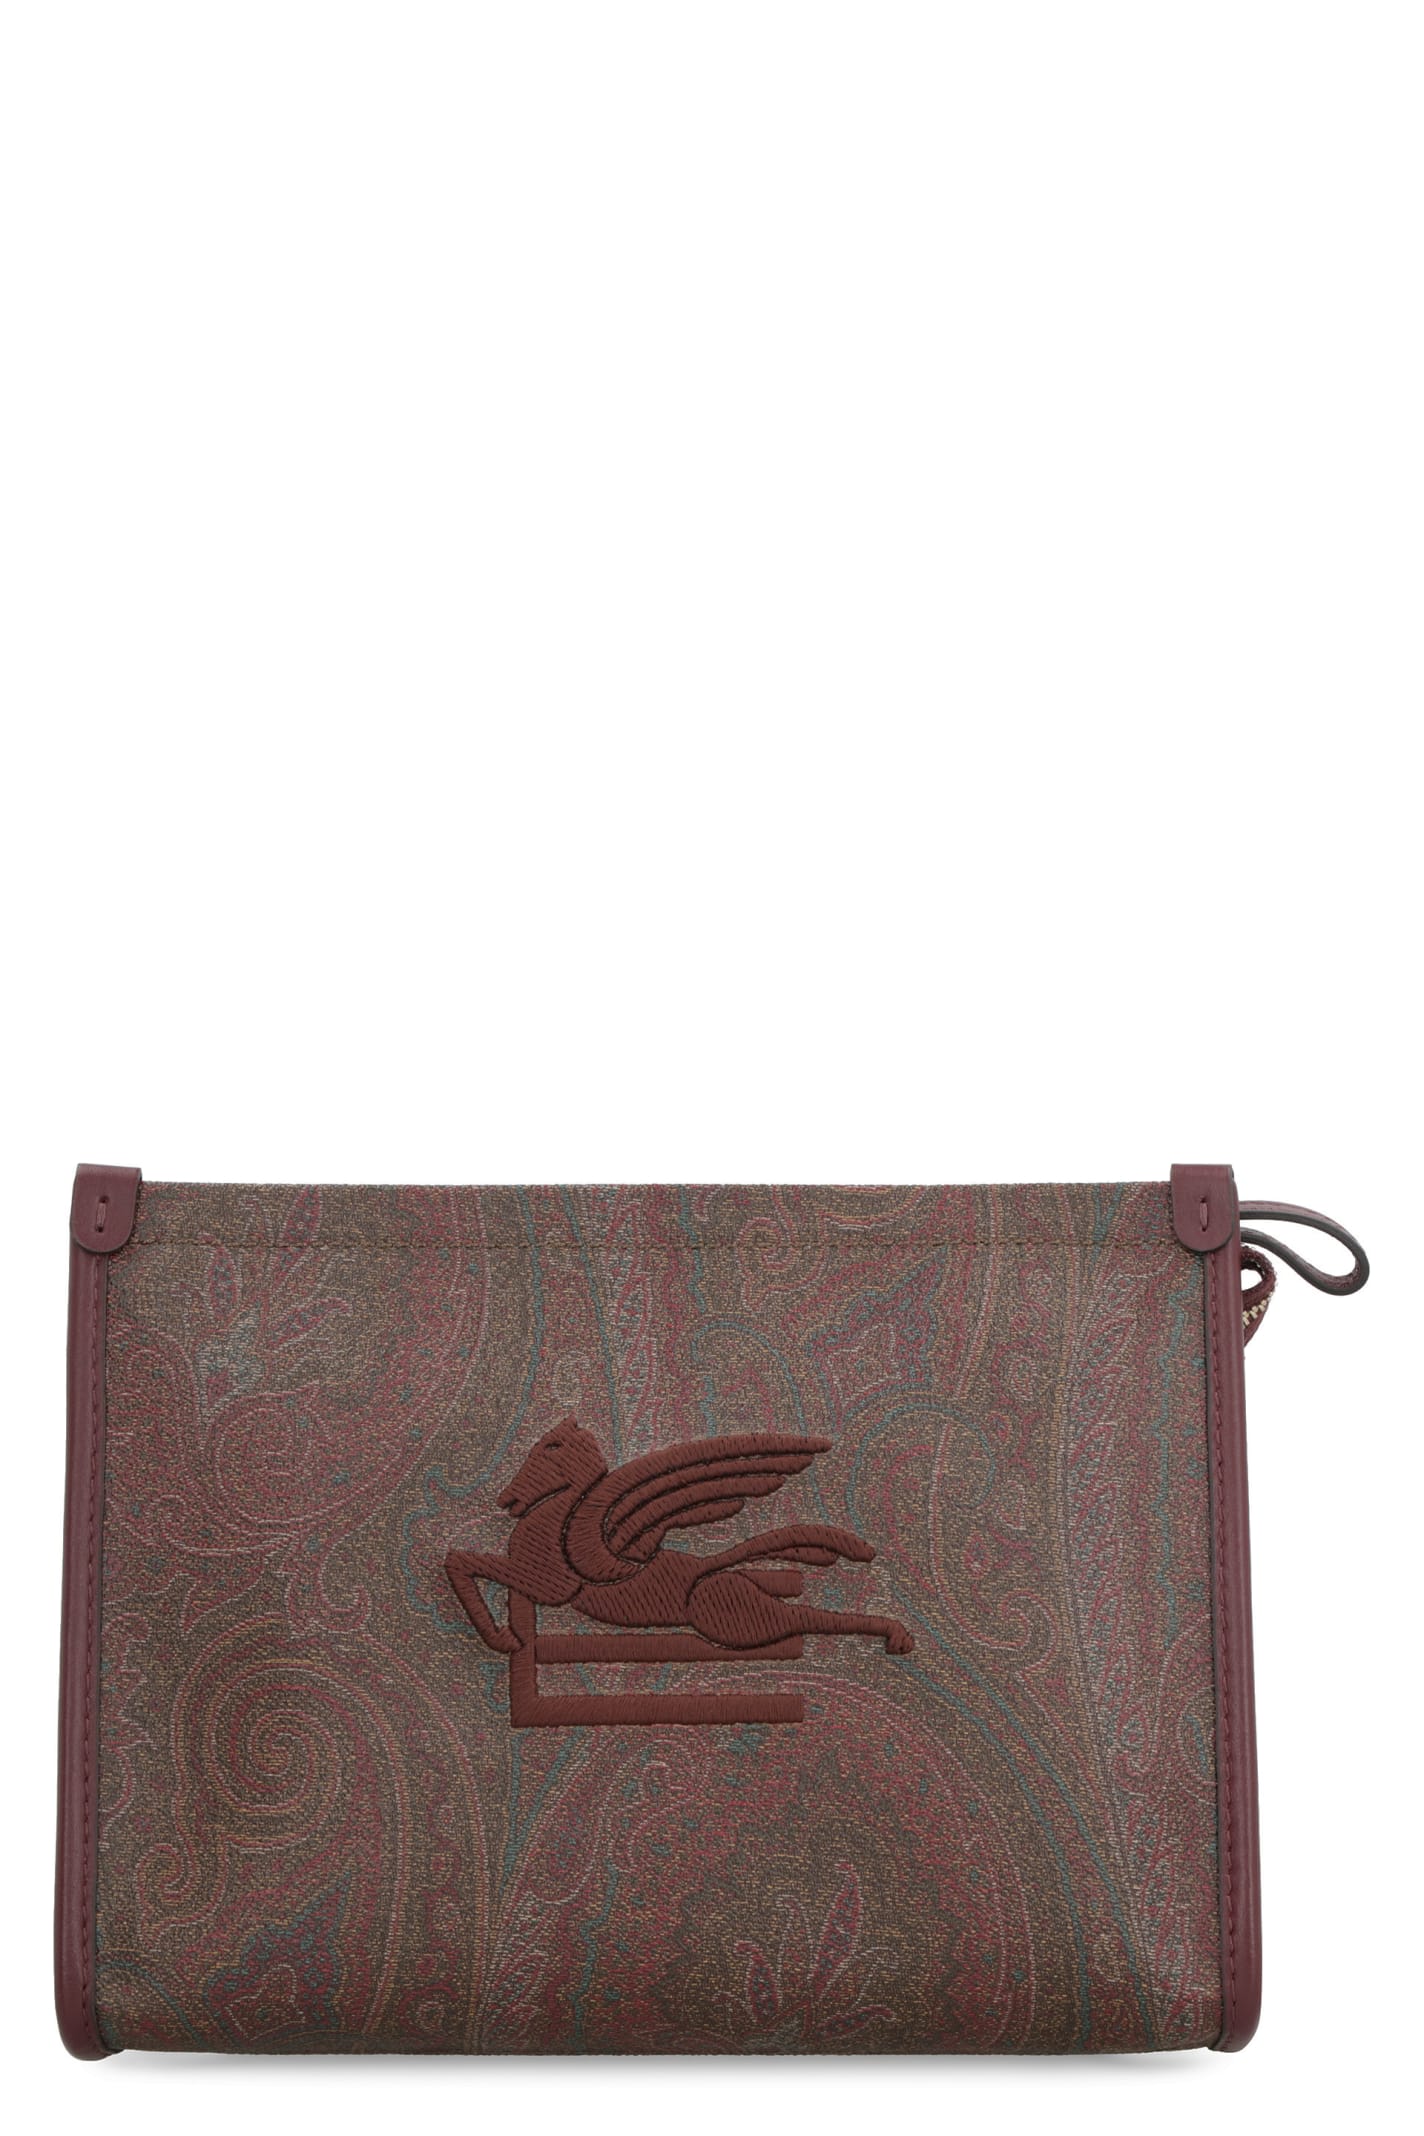 Etro Love Trotter Pouch In Brown